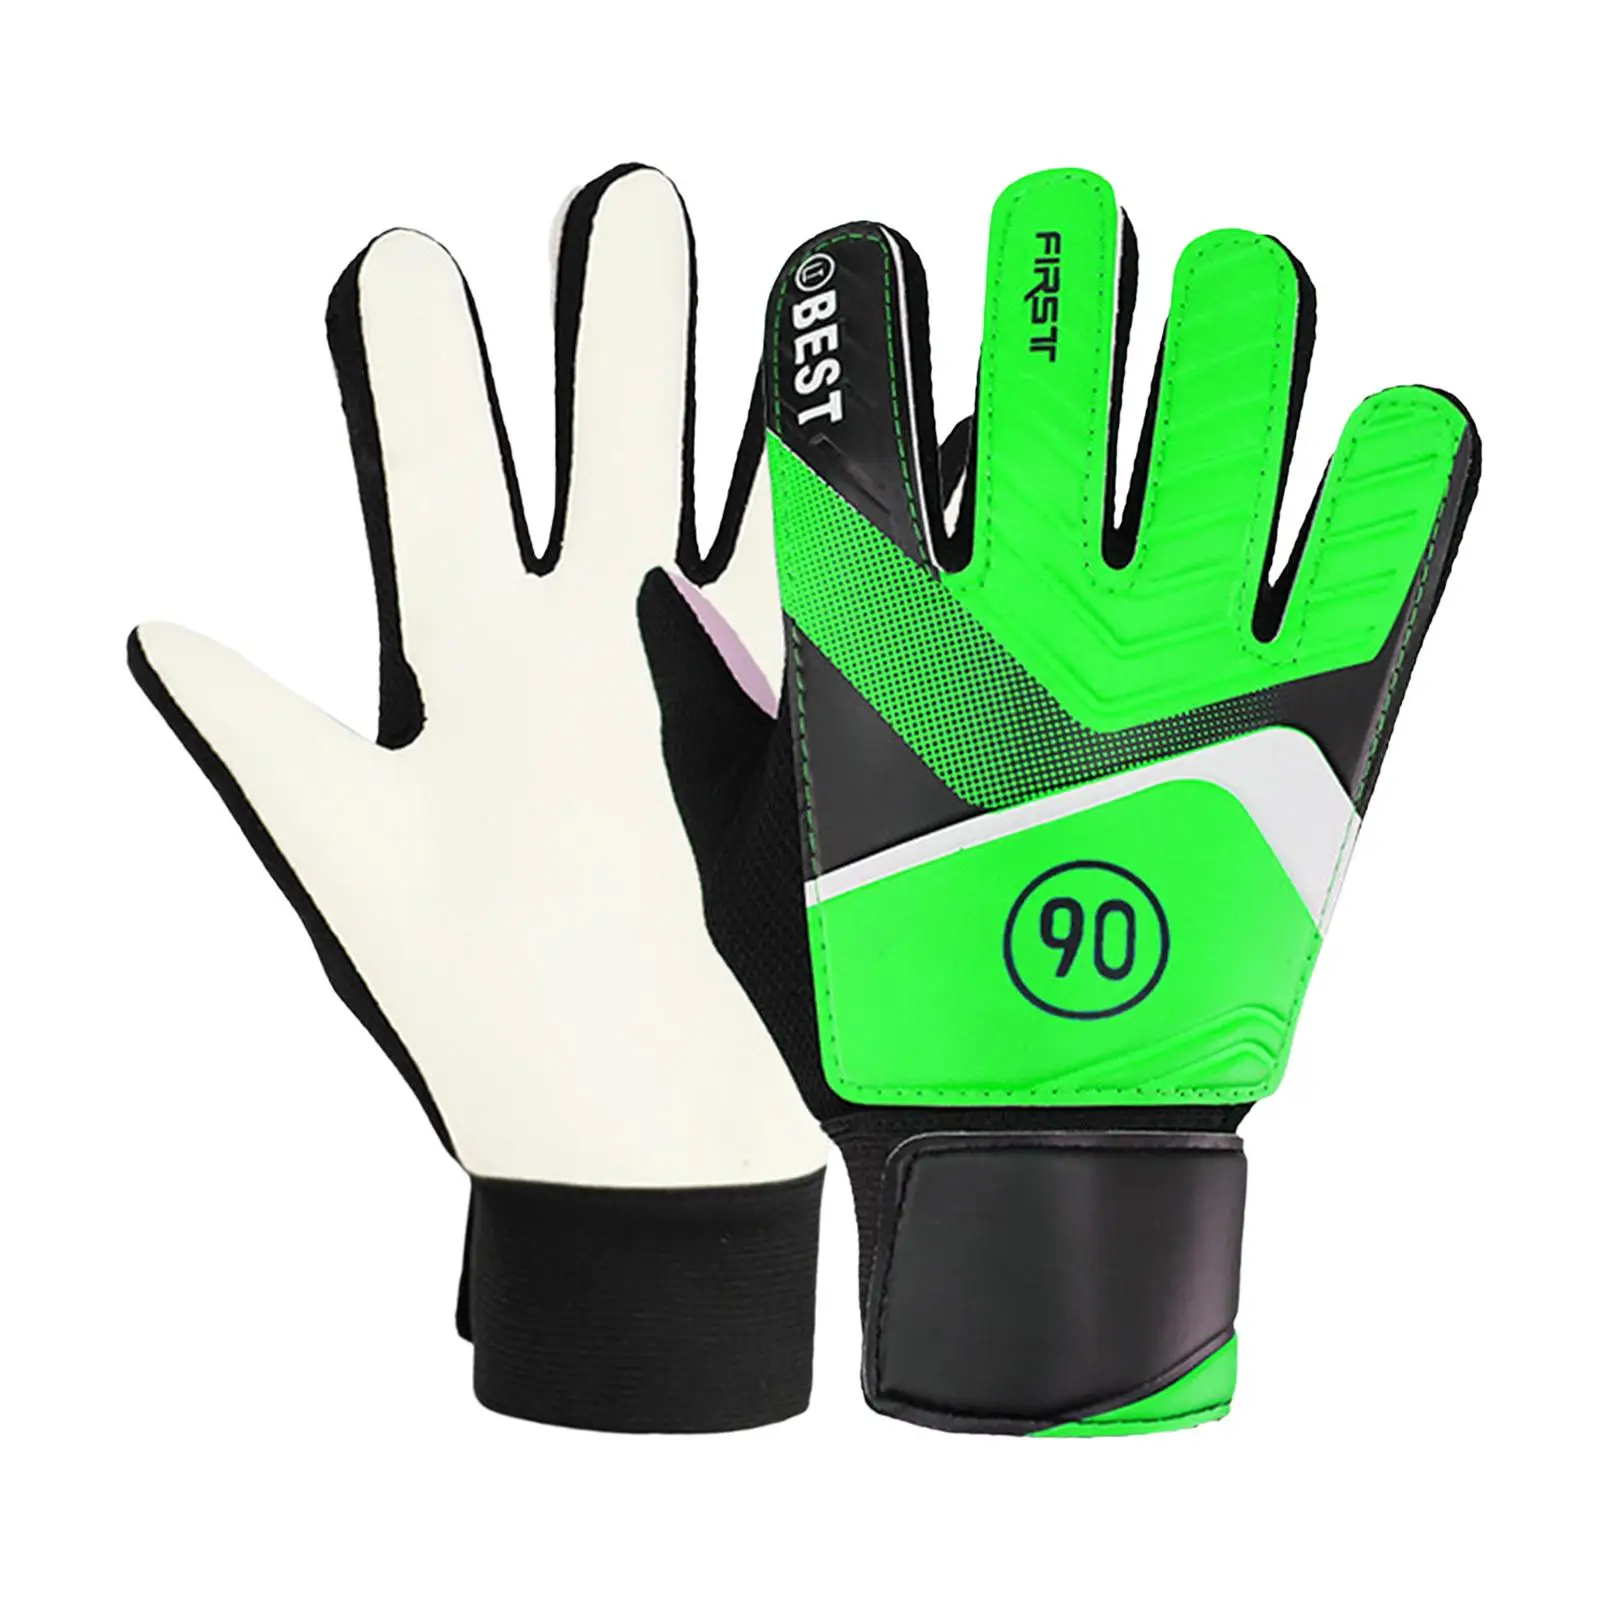 Goalkeeper Gloves Anticollision Finger Protection High Performance Match Professional Strong Grip Thickened for Kids Latex Palm